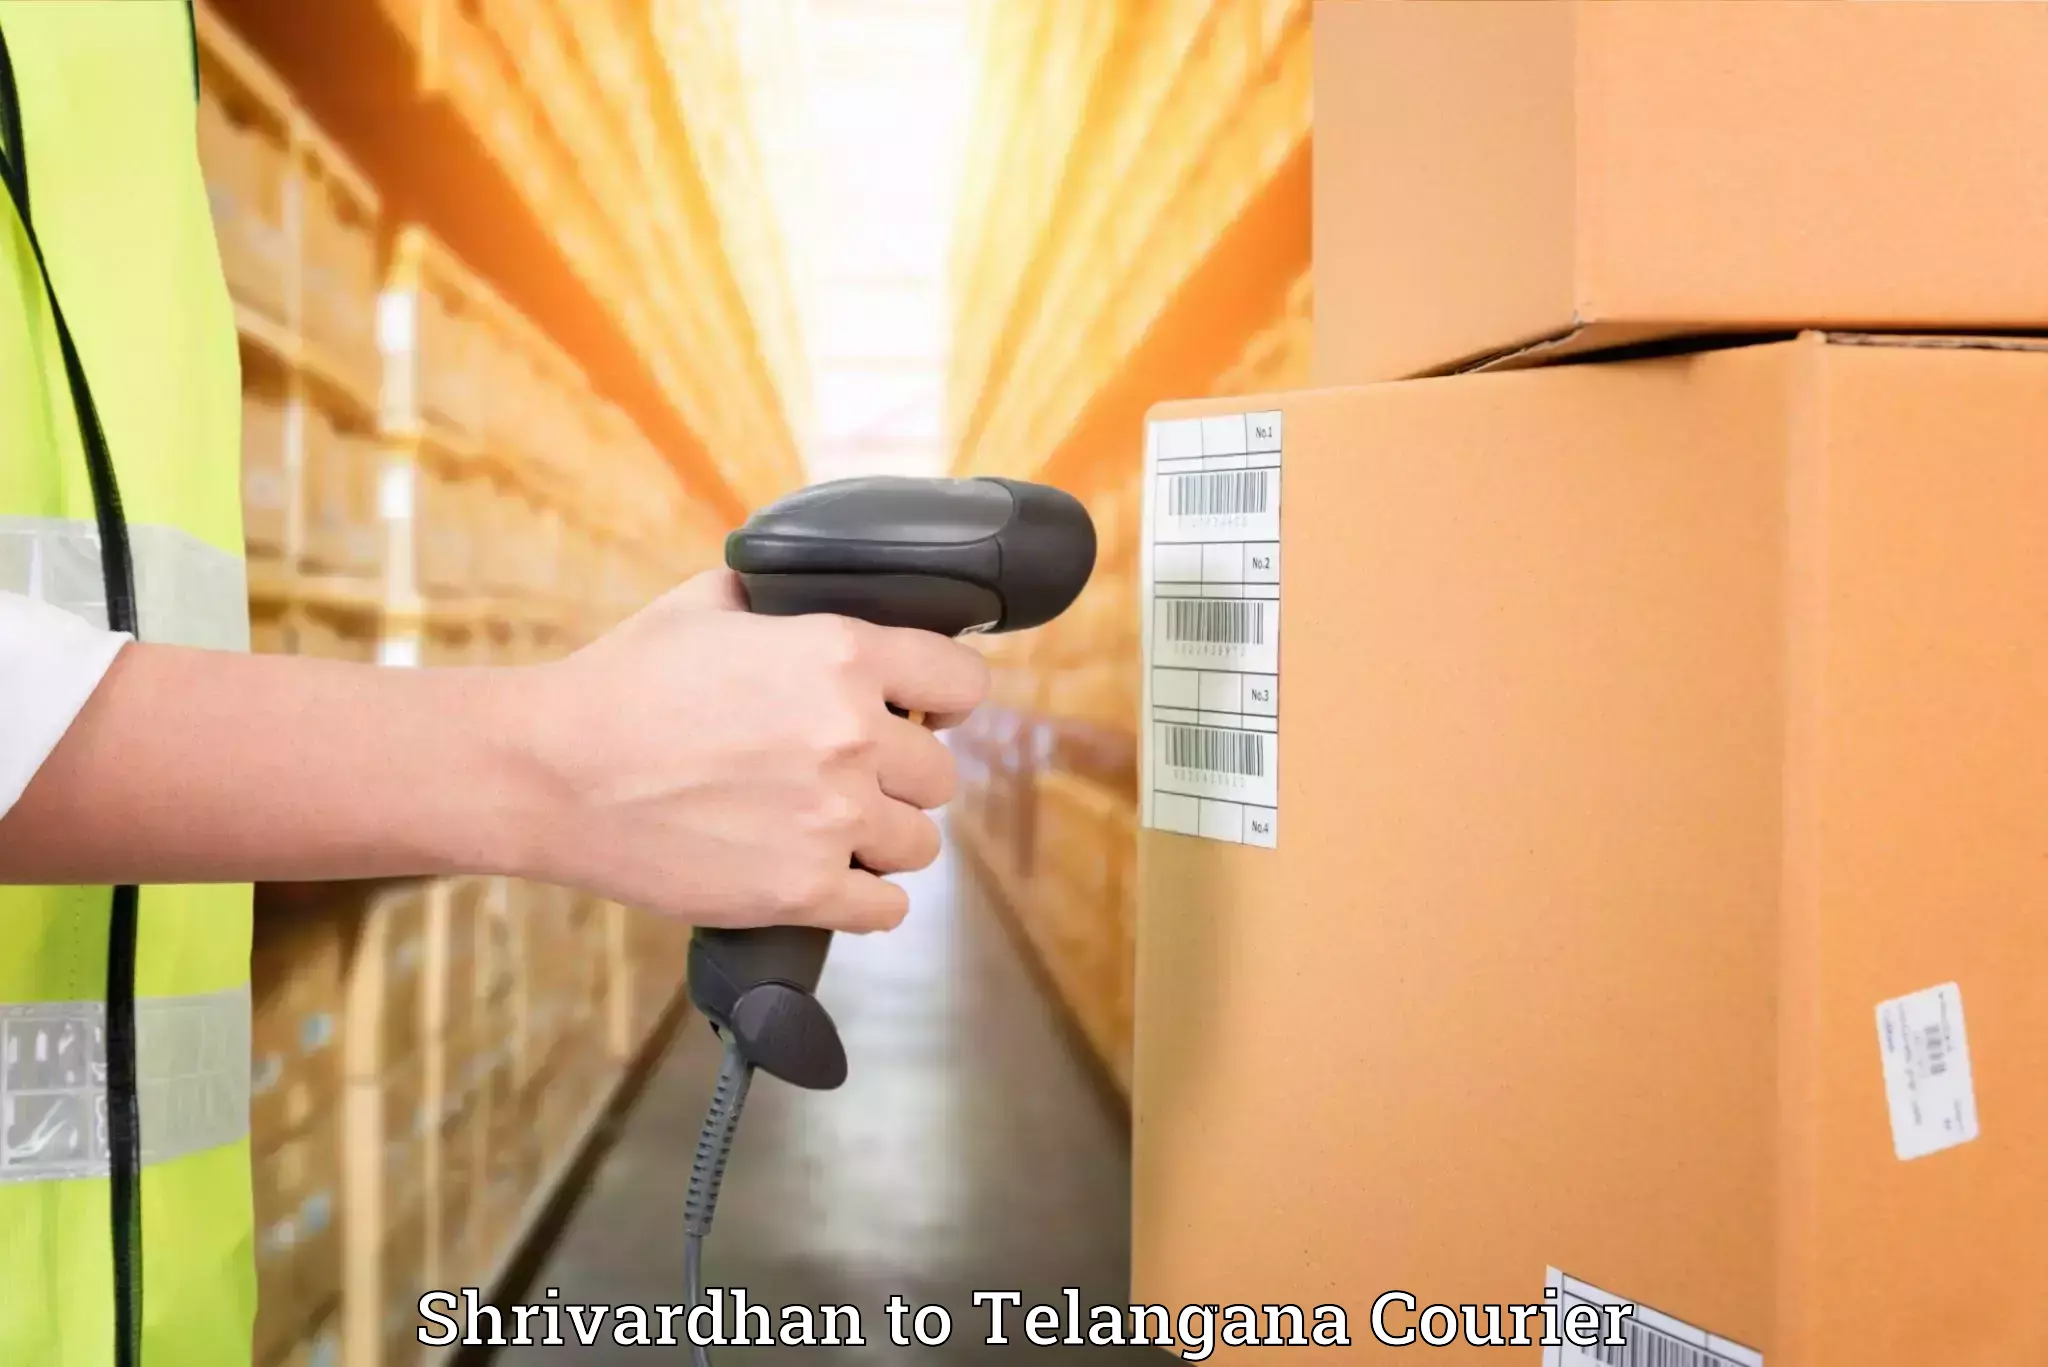 Moving and storage services in Shrivardhan to Khairatabad